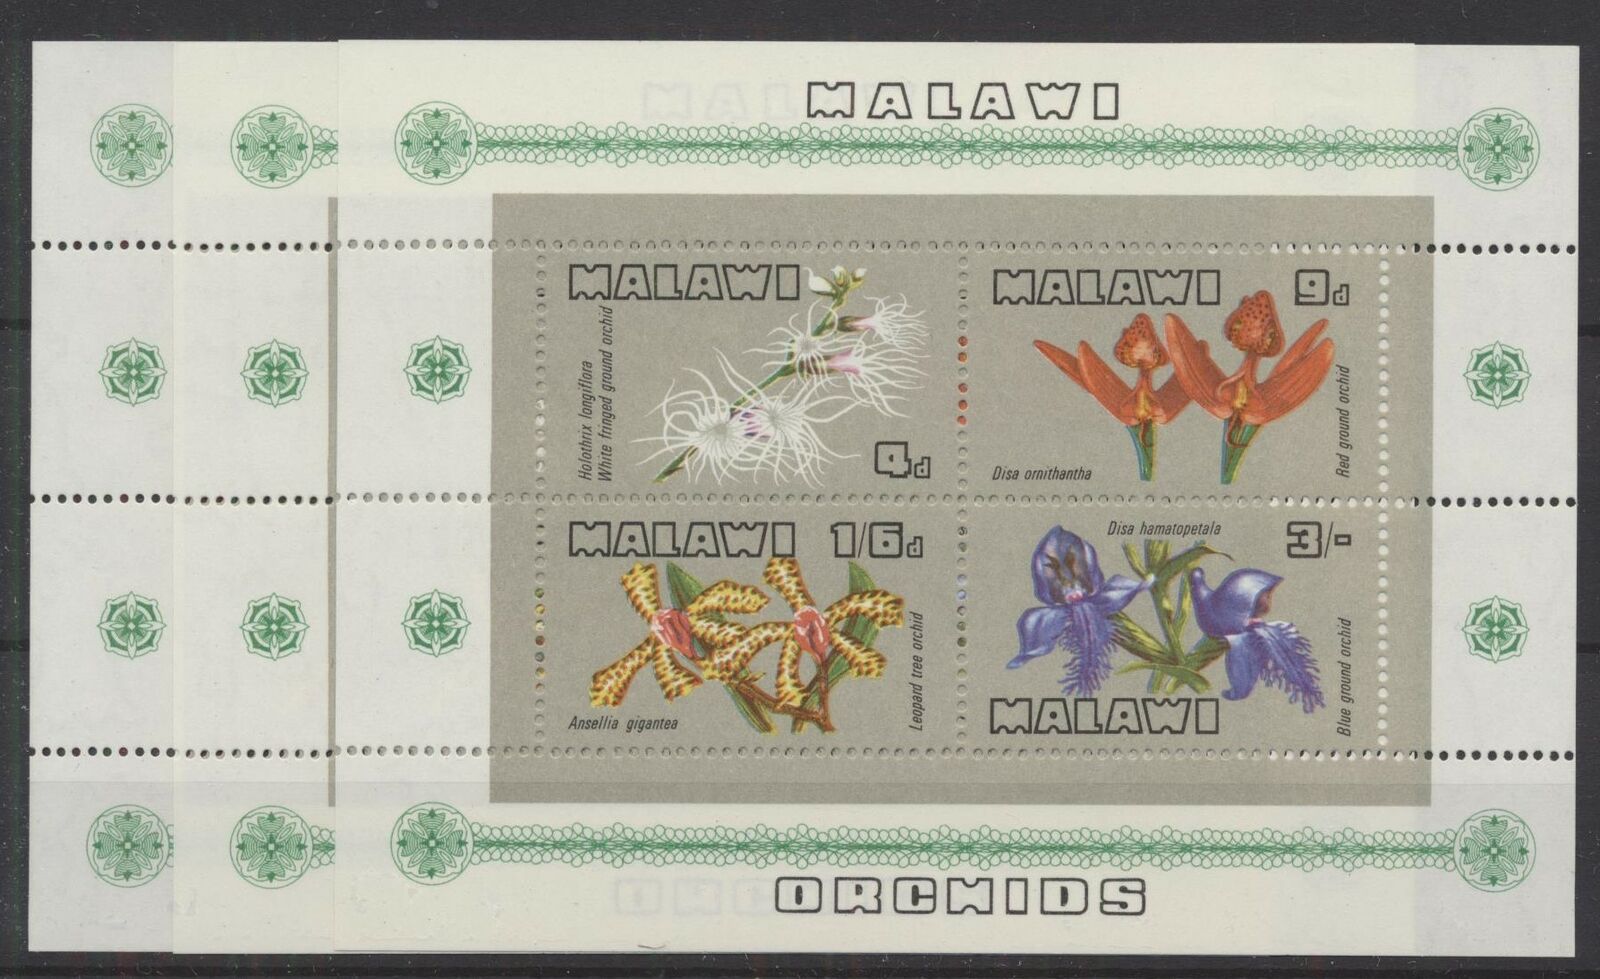 Our shop most popular P26153 Sales results No. 1 Malawi flowers good very sheet fine MNH X3